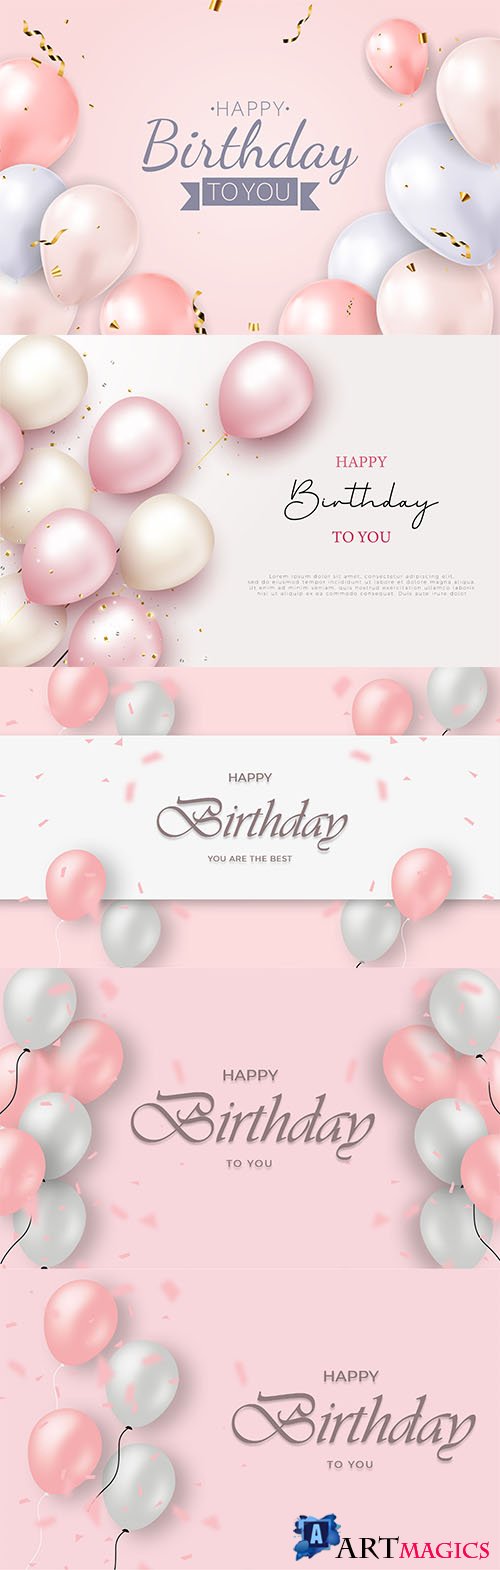 Realistic happy birthday background with pink and white balloons